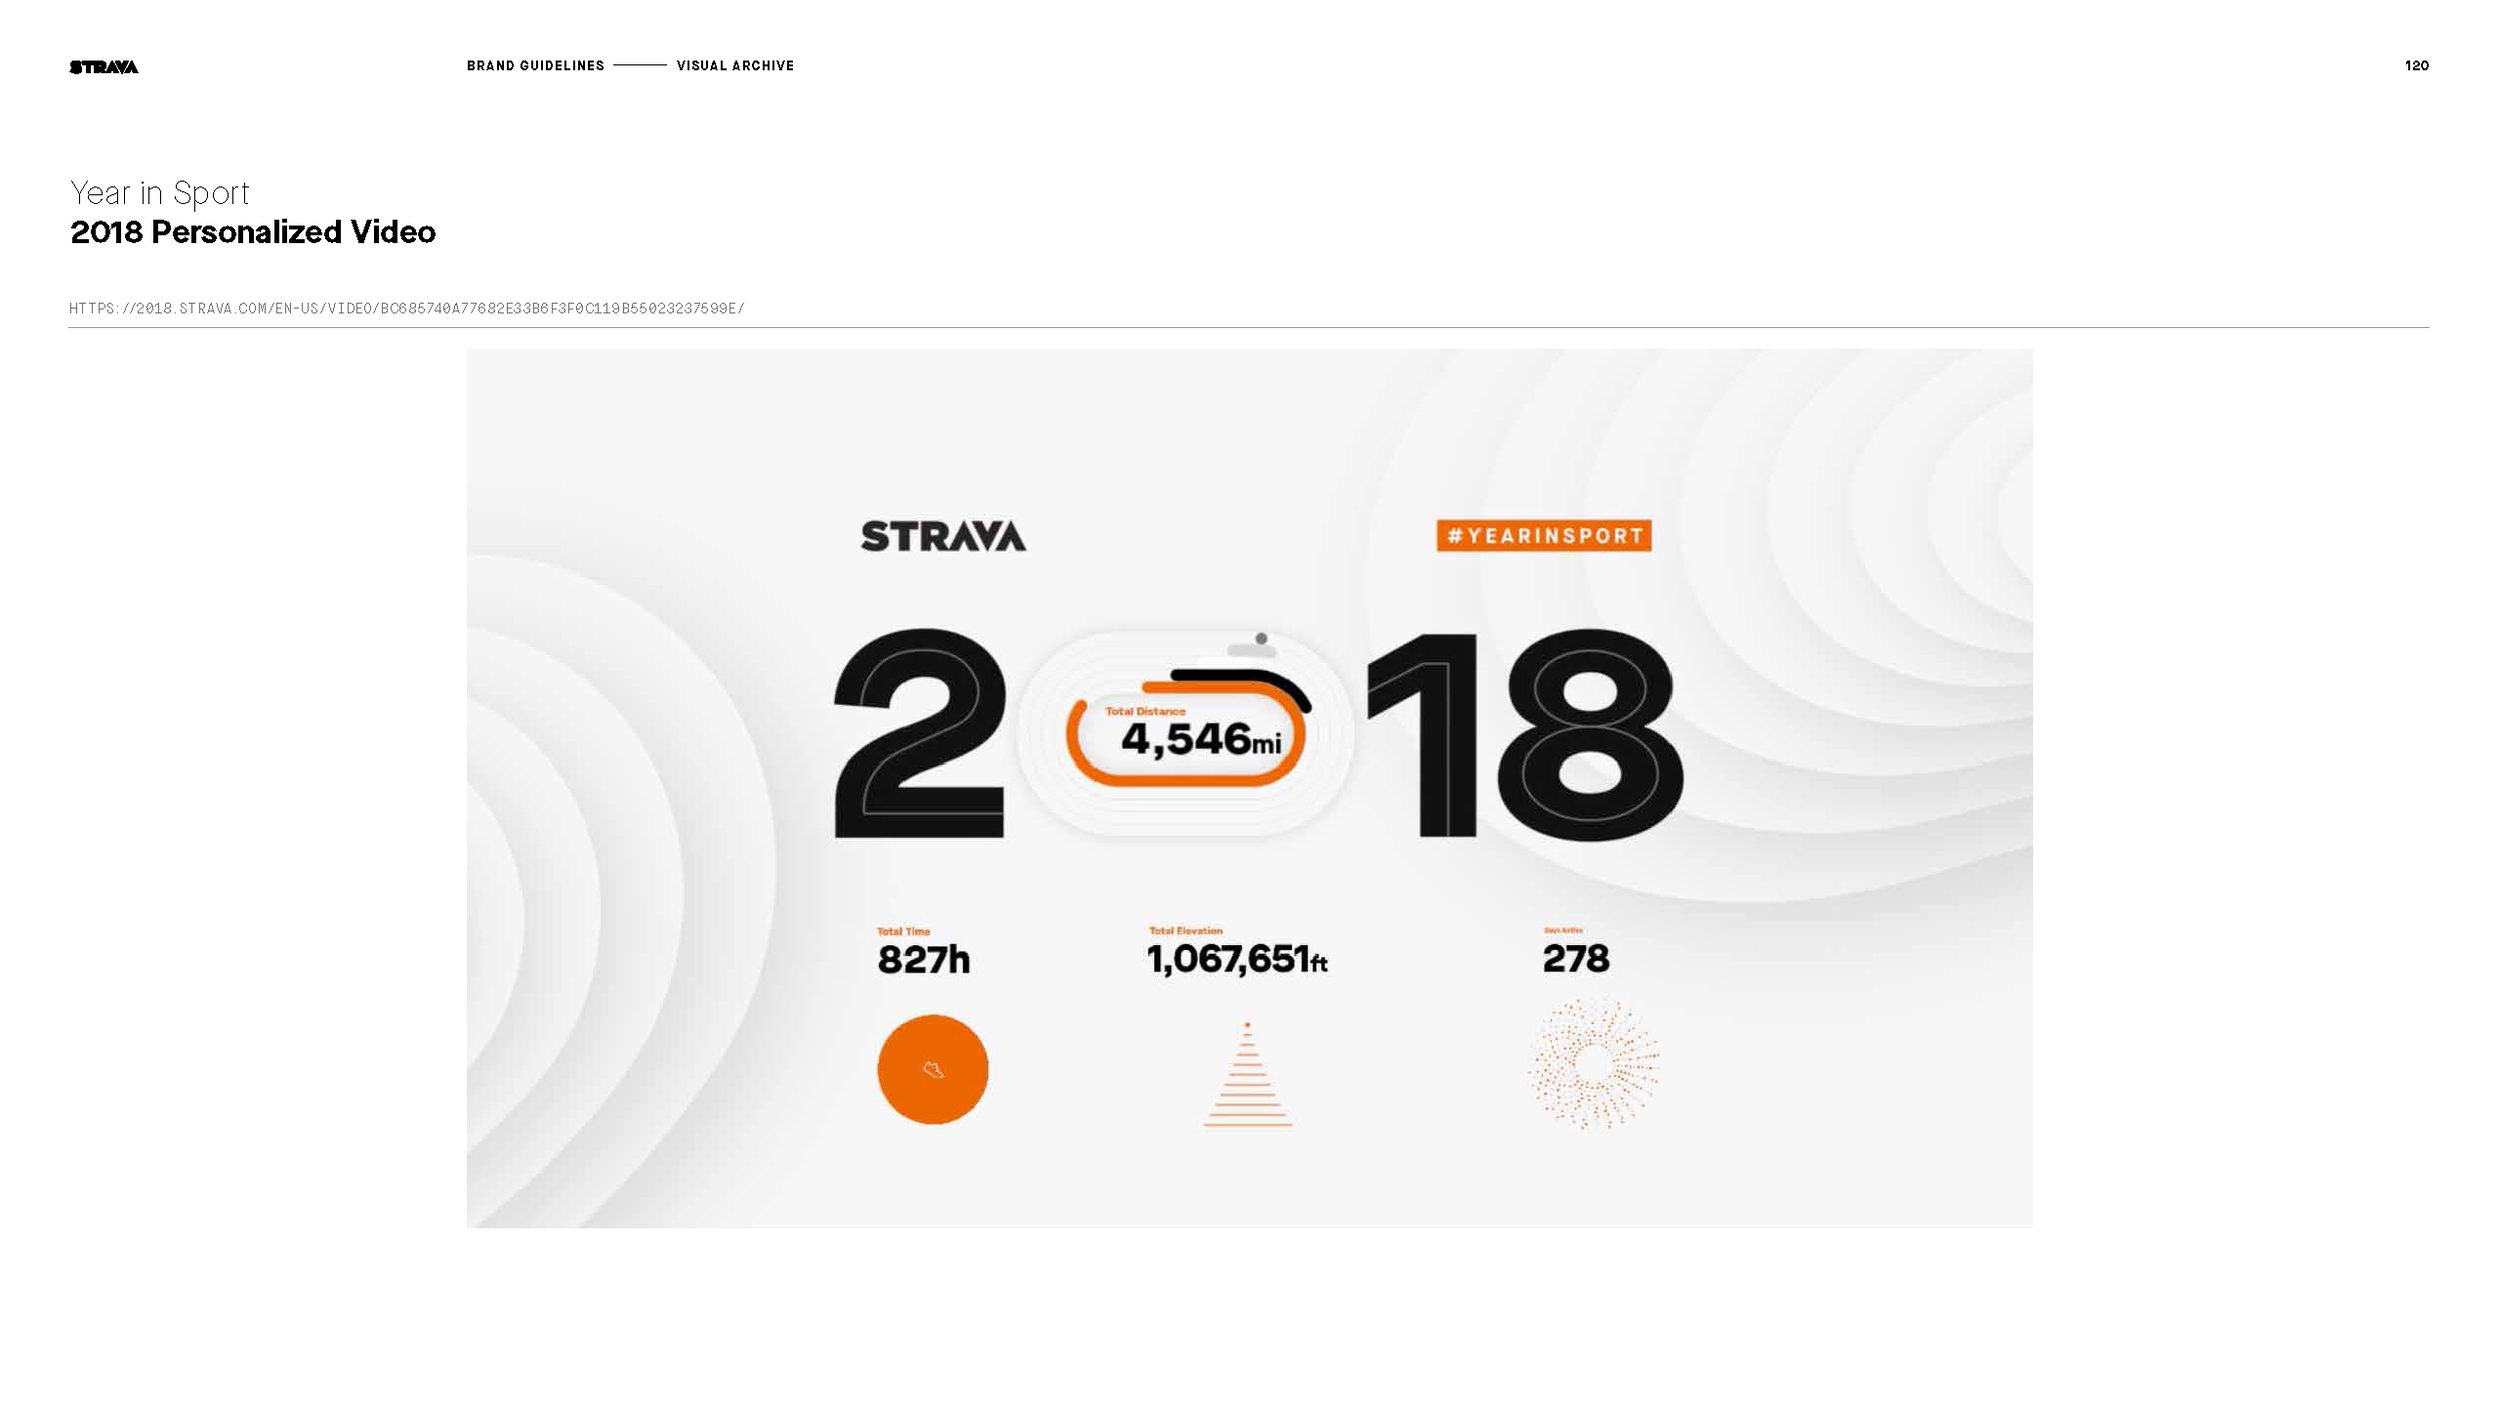 Strava_Page_120.png